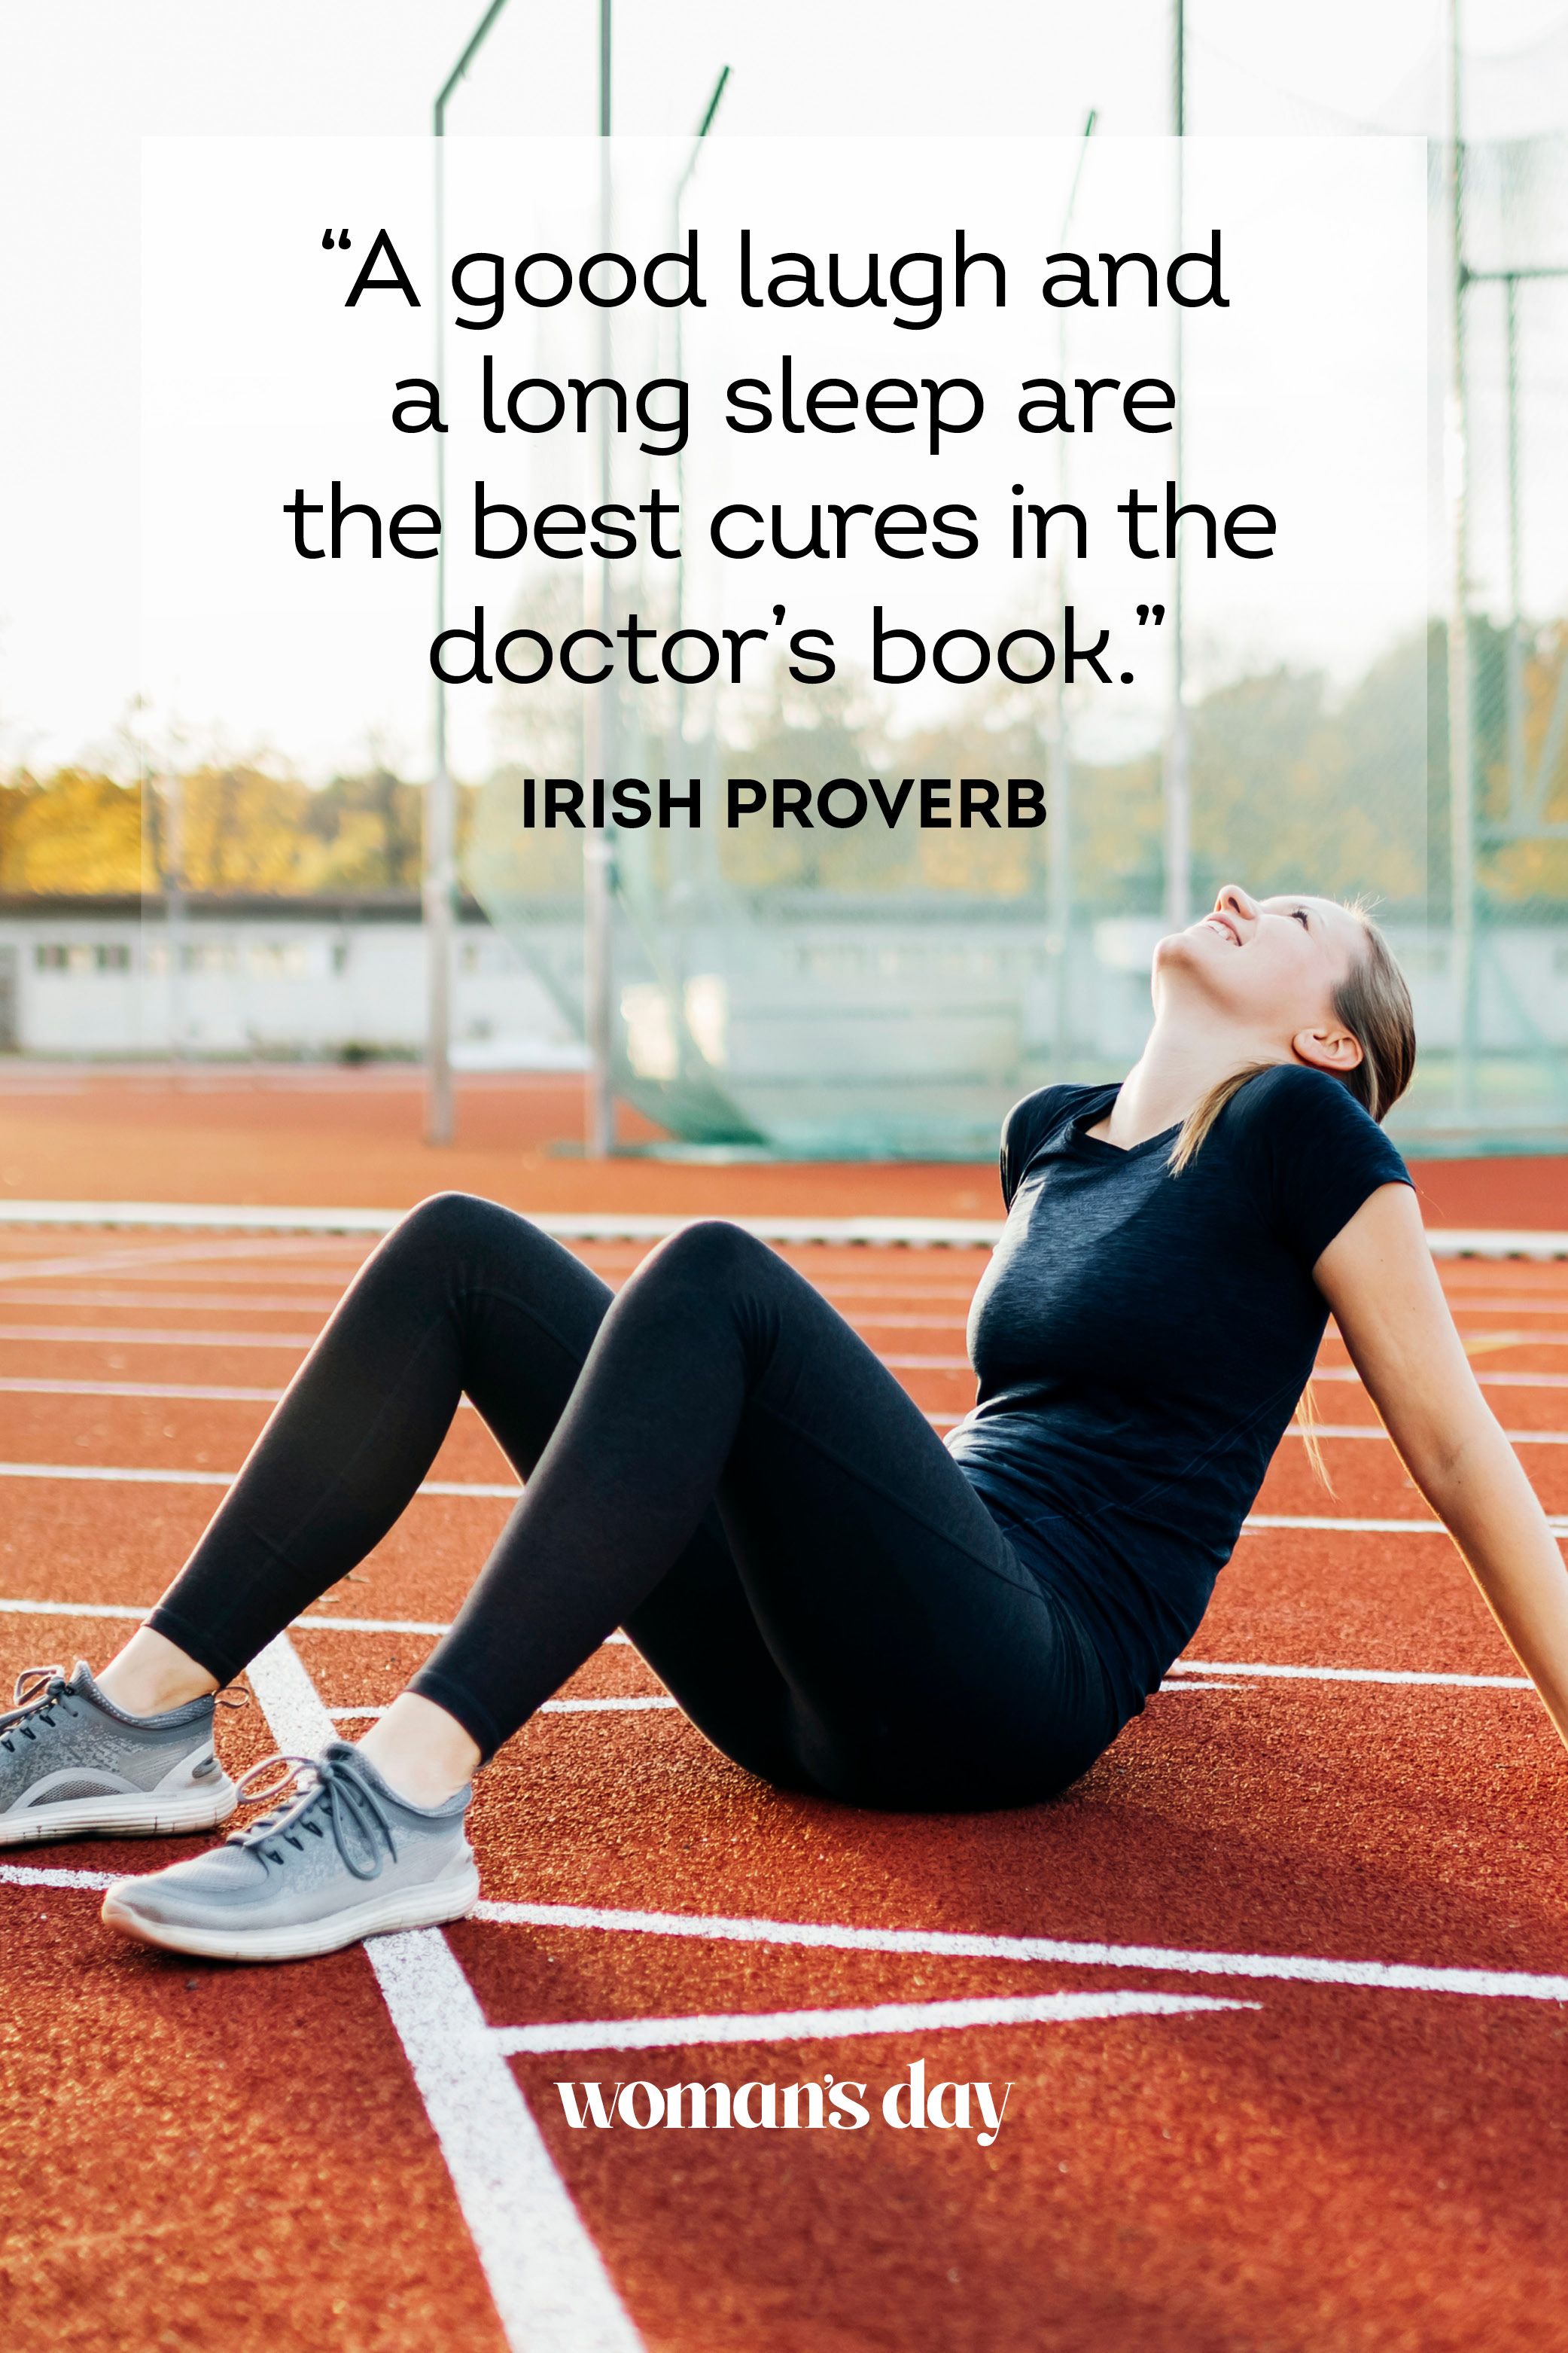 6 Best Fitness Quotes and Why They're So Spot On!